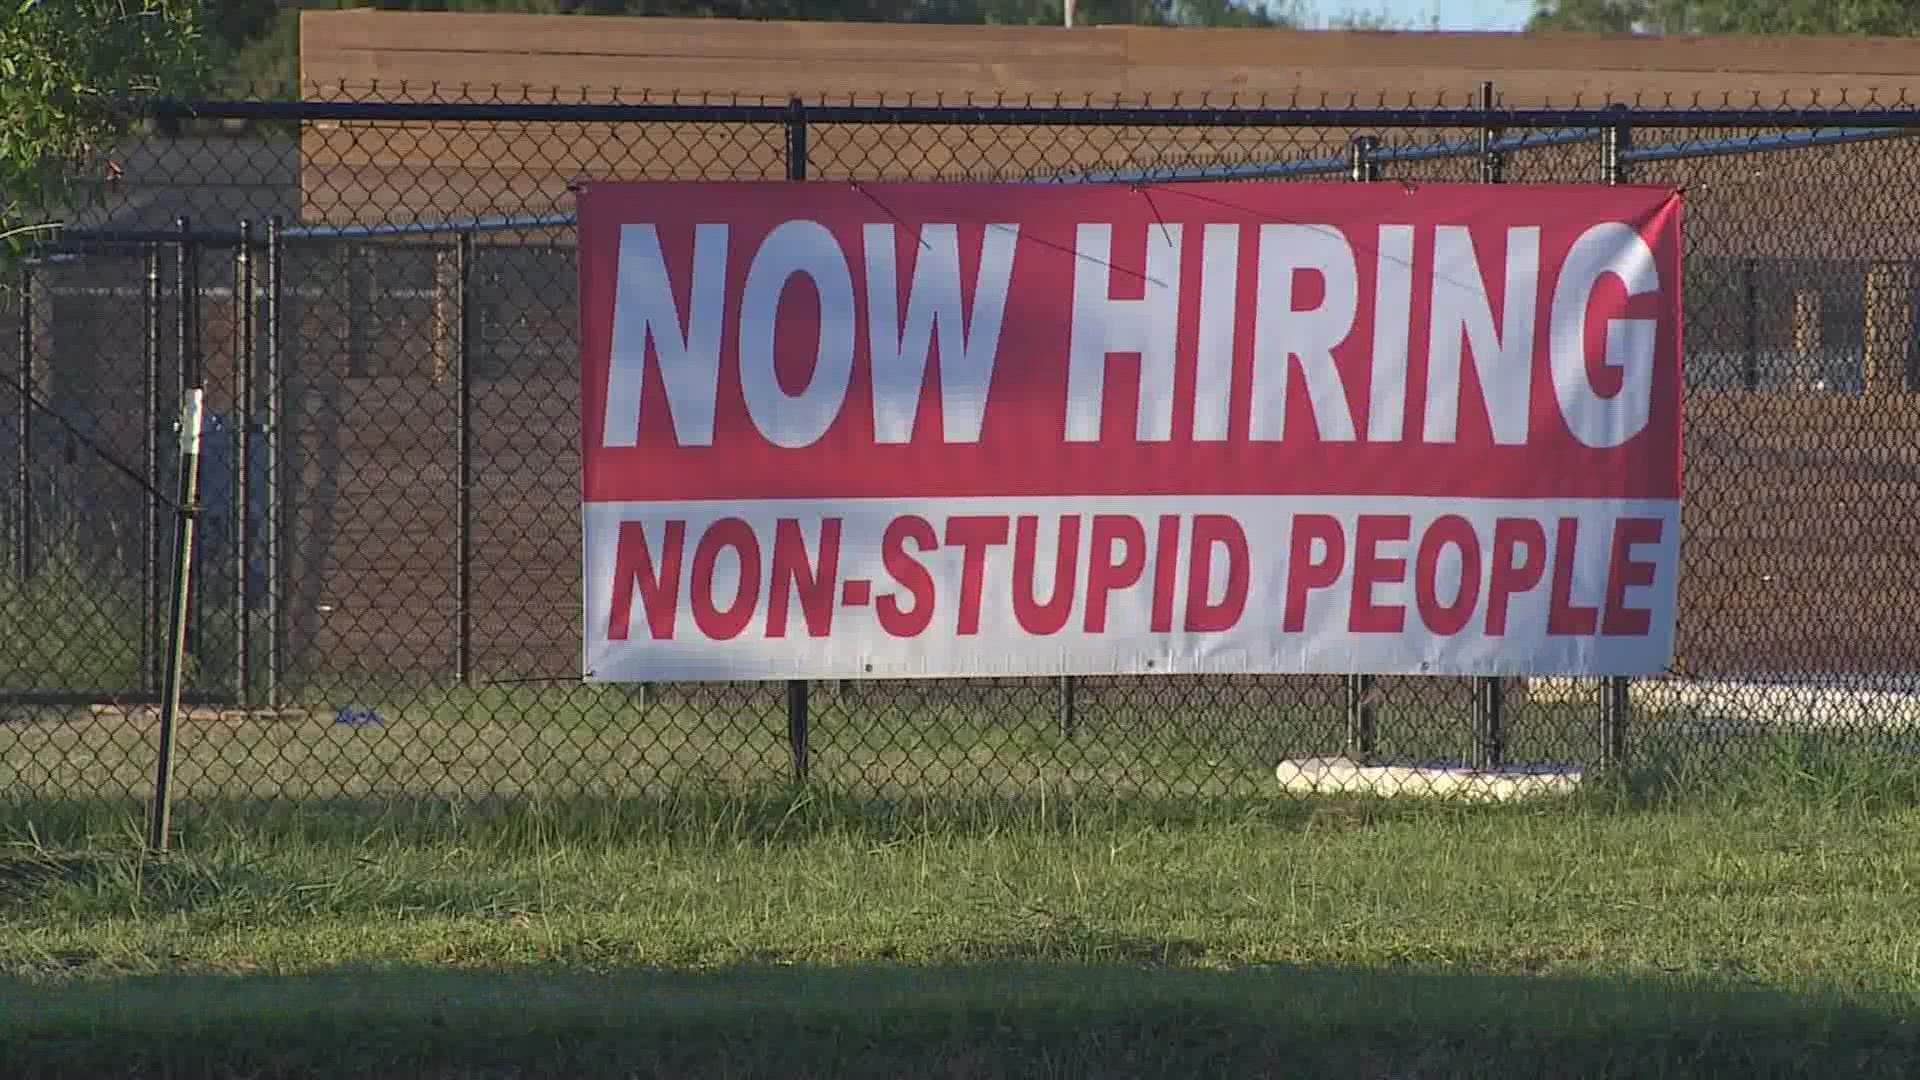 The owner of Pets Gone Wild Resort put up a hiring sign that is causing a mixed reaction in the community.